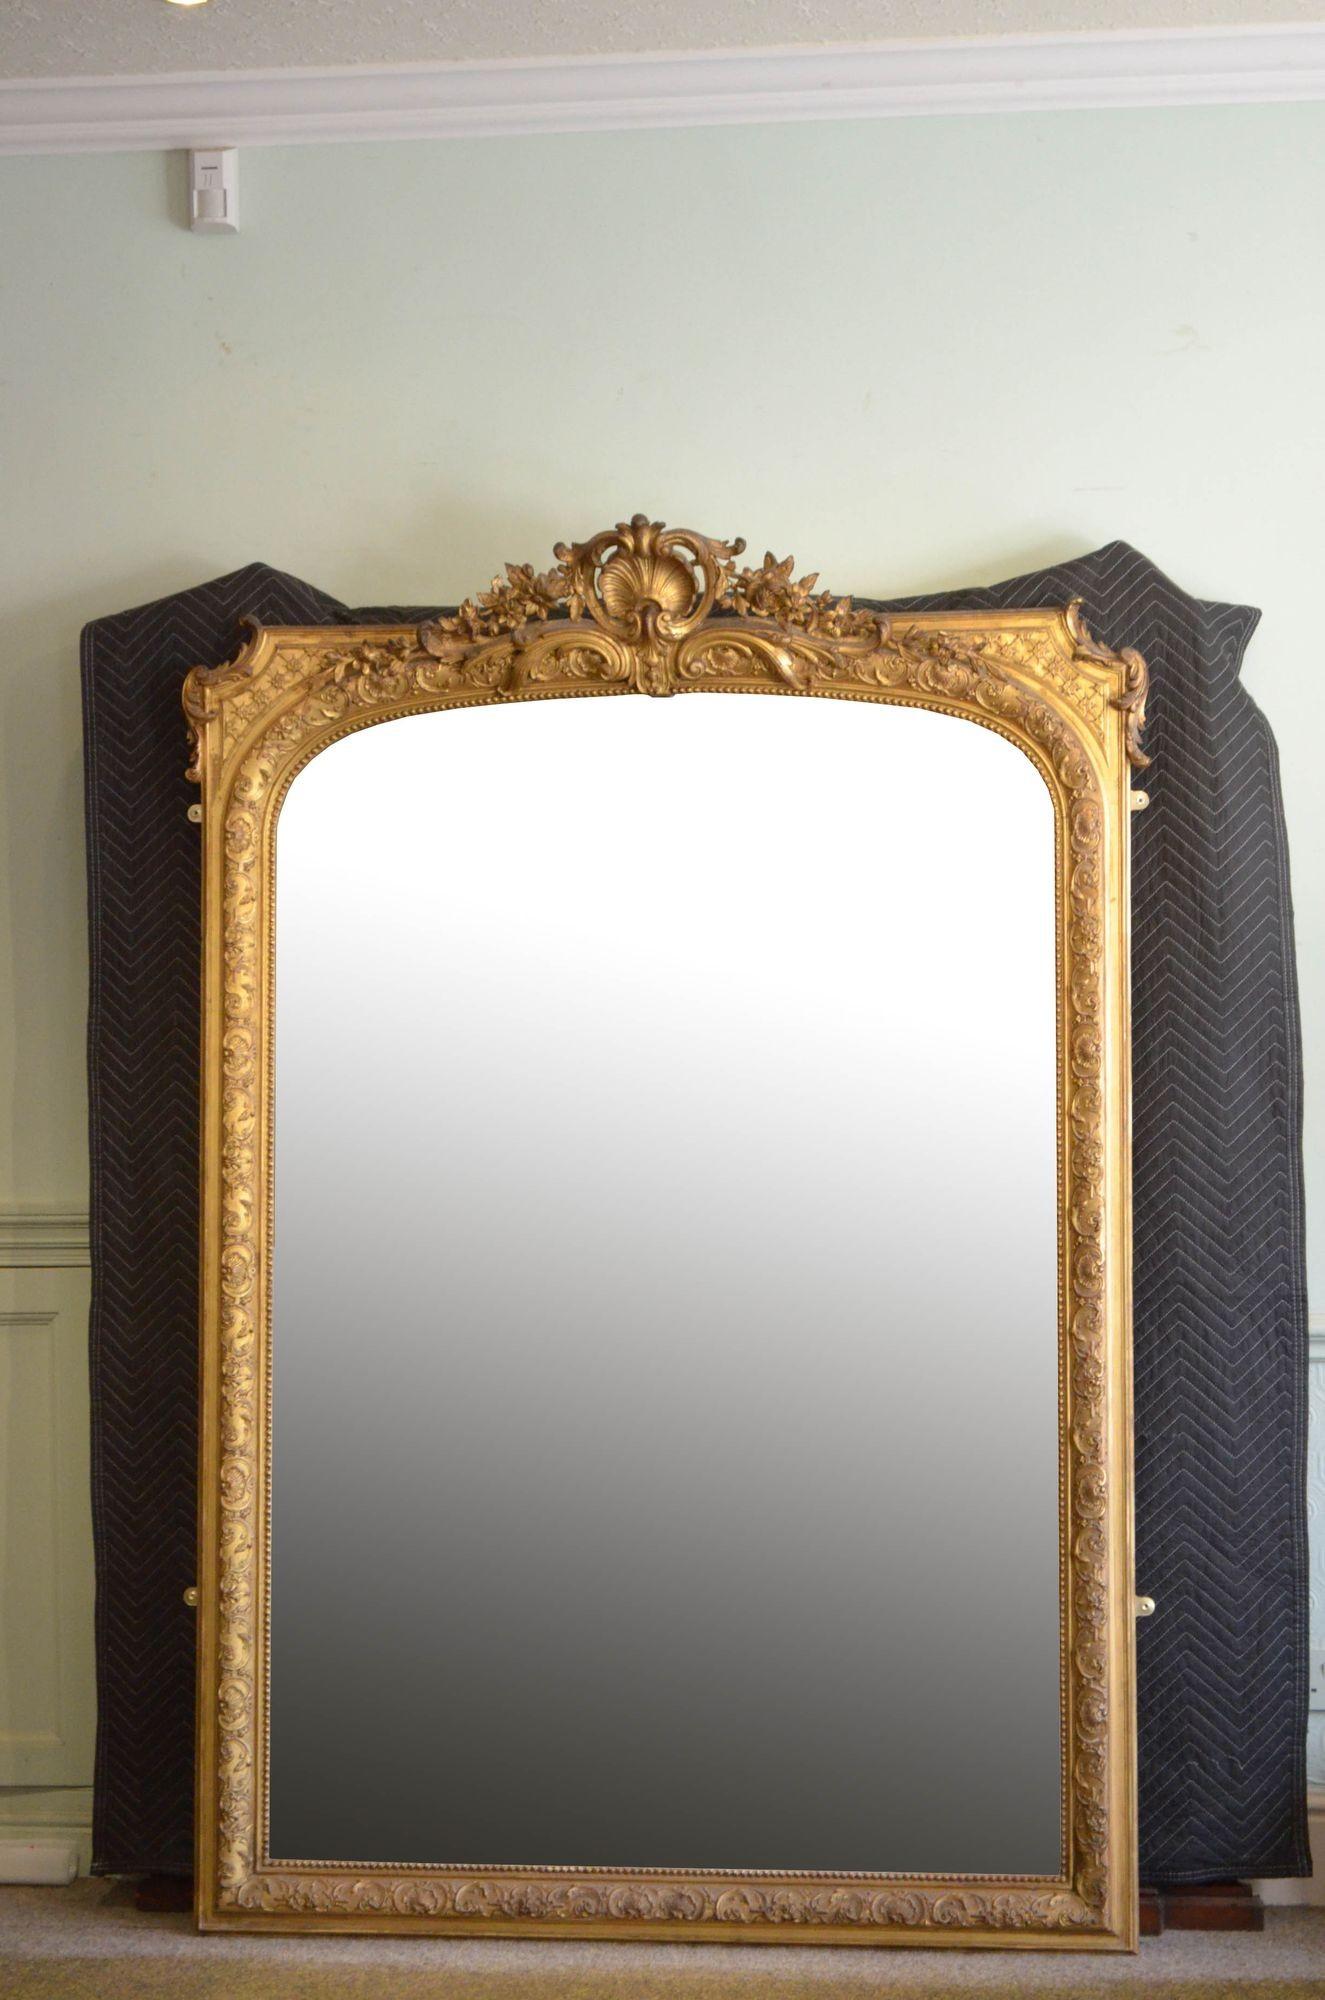 Sn5475 Exceptional 19th century mirror of versatile form (can be hung on the wall or stood on the floor), having original glass with some foxing in beaded flower and shell carved gilded frame with elaborate foliage crest to the centre. This antique